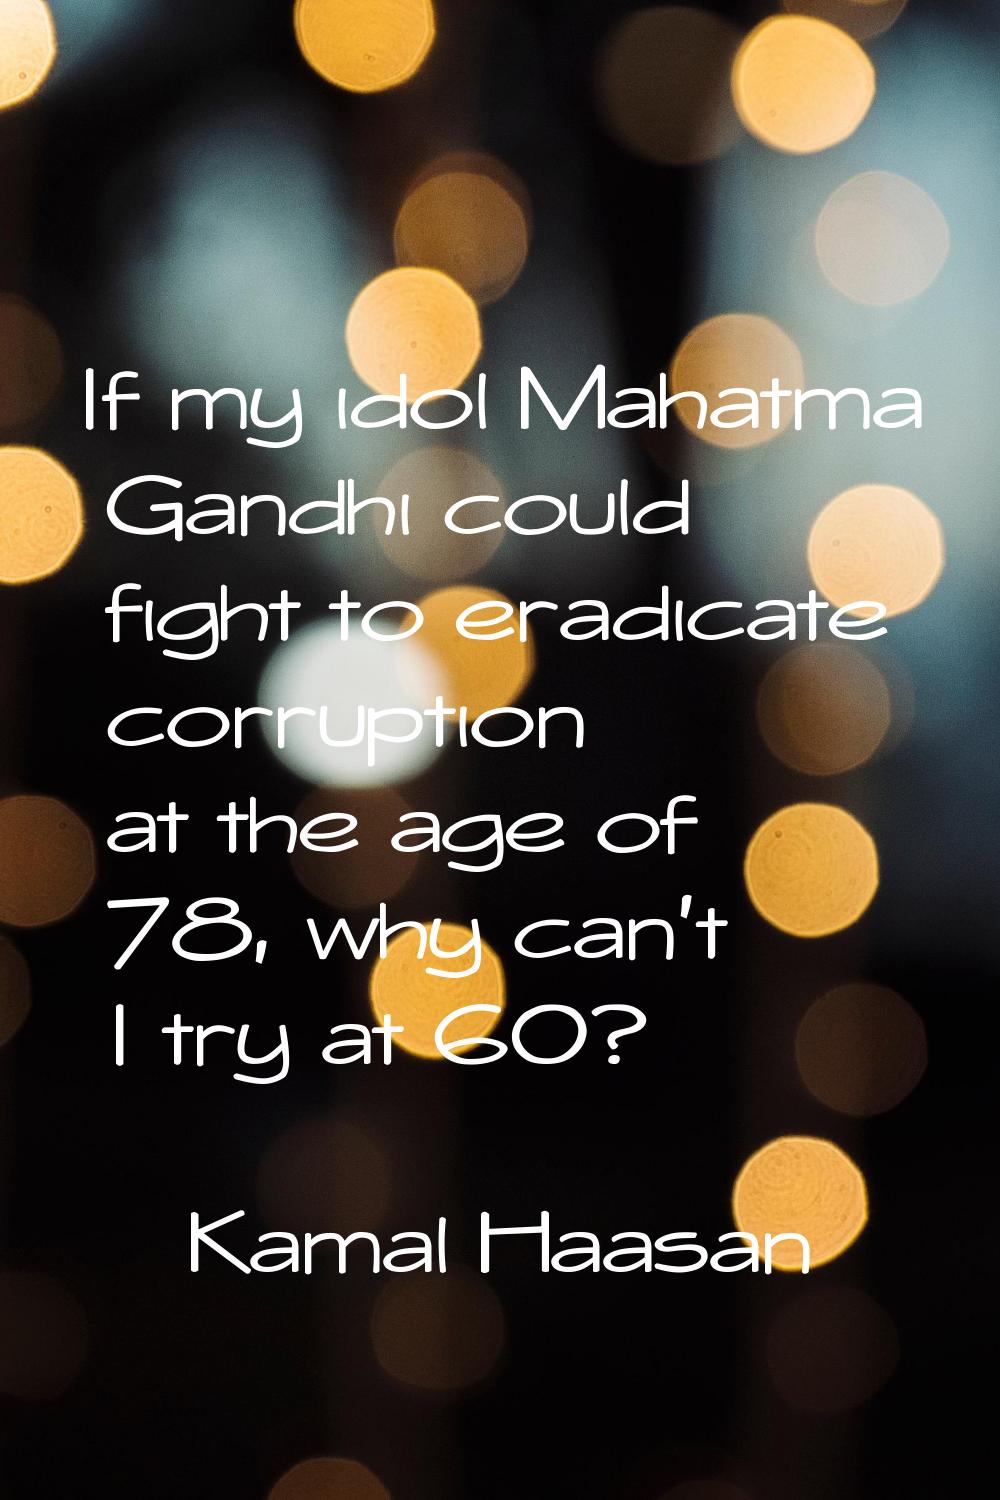 If my idol Mahatma Gandhi could fight to eradicate corruption at the age of 78, why can't I try at 